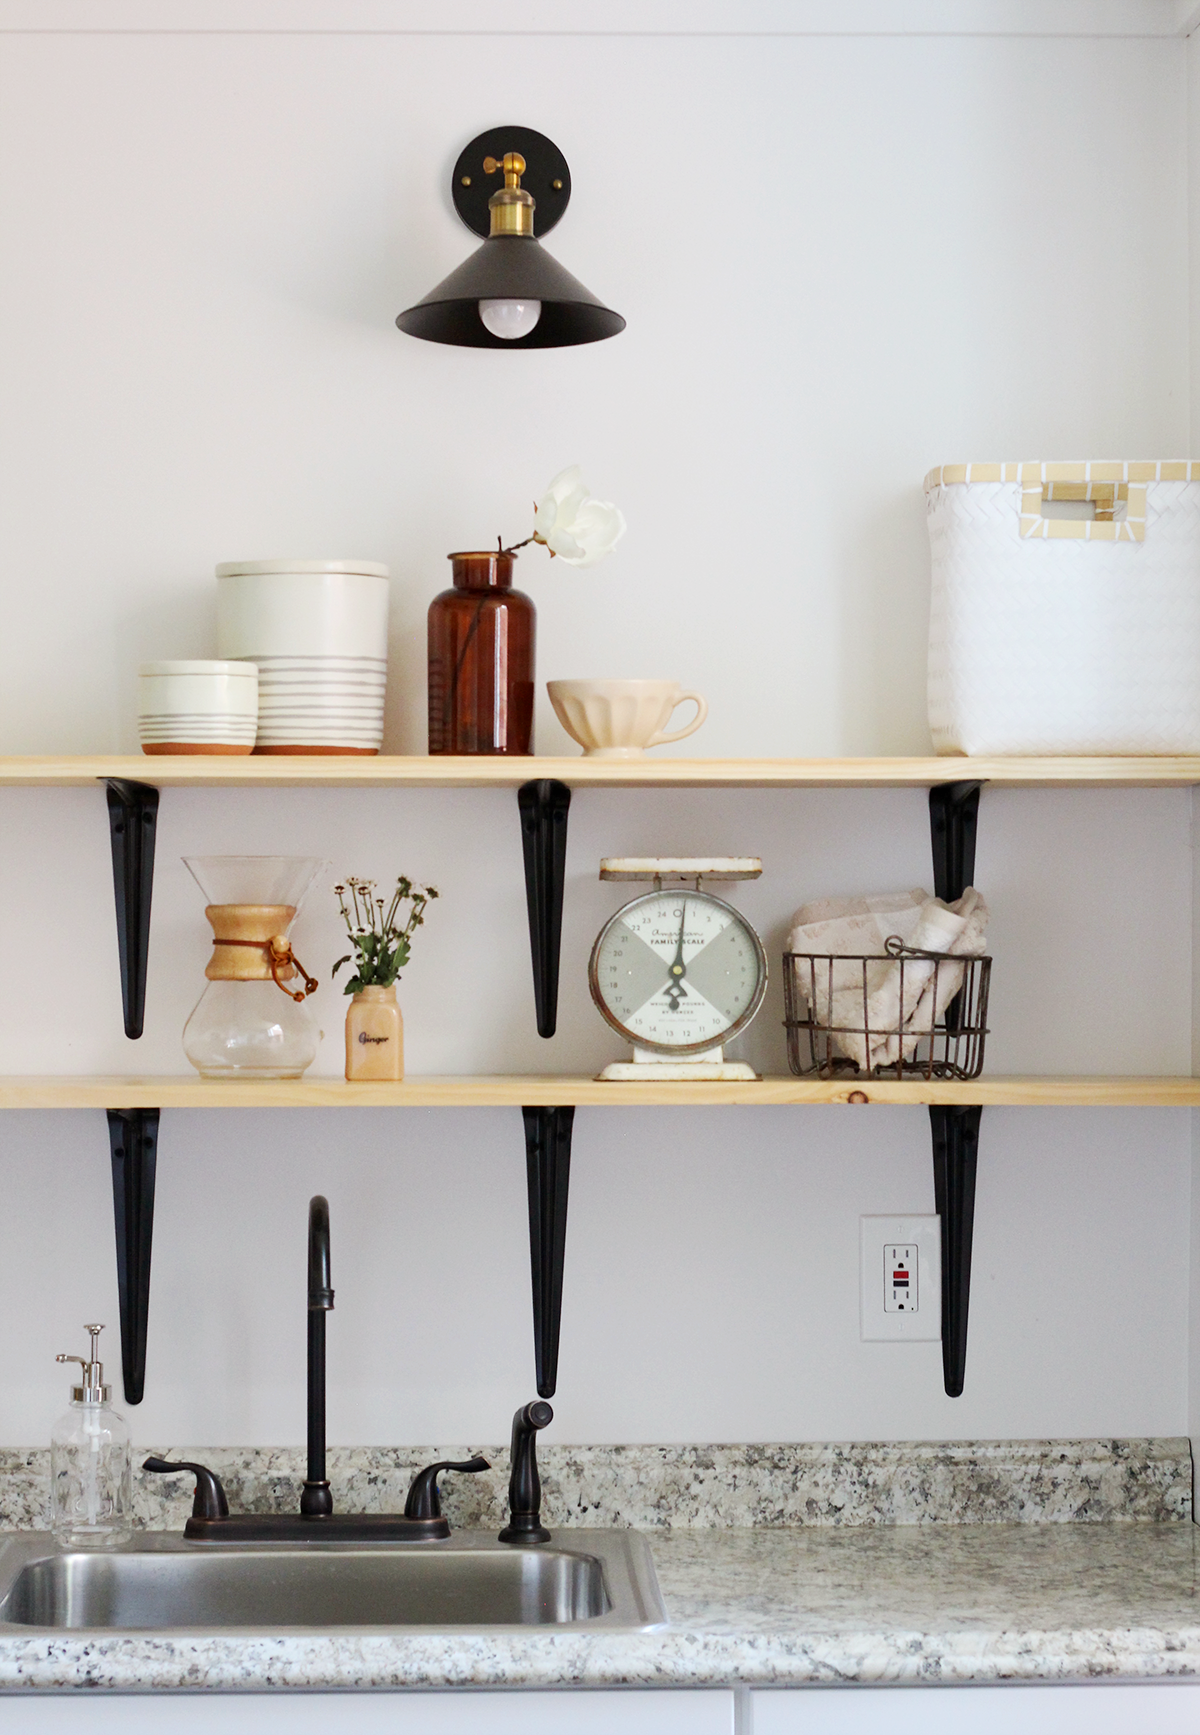 How to Decorate Open Shelving- Kitchen edition!